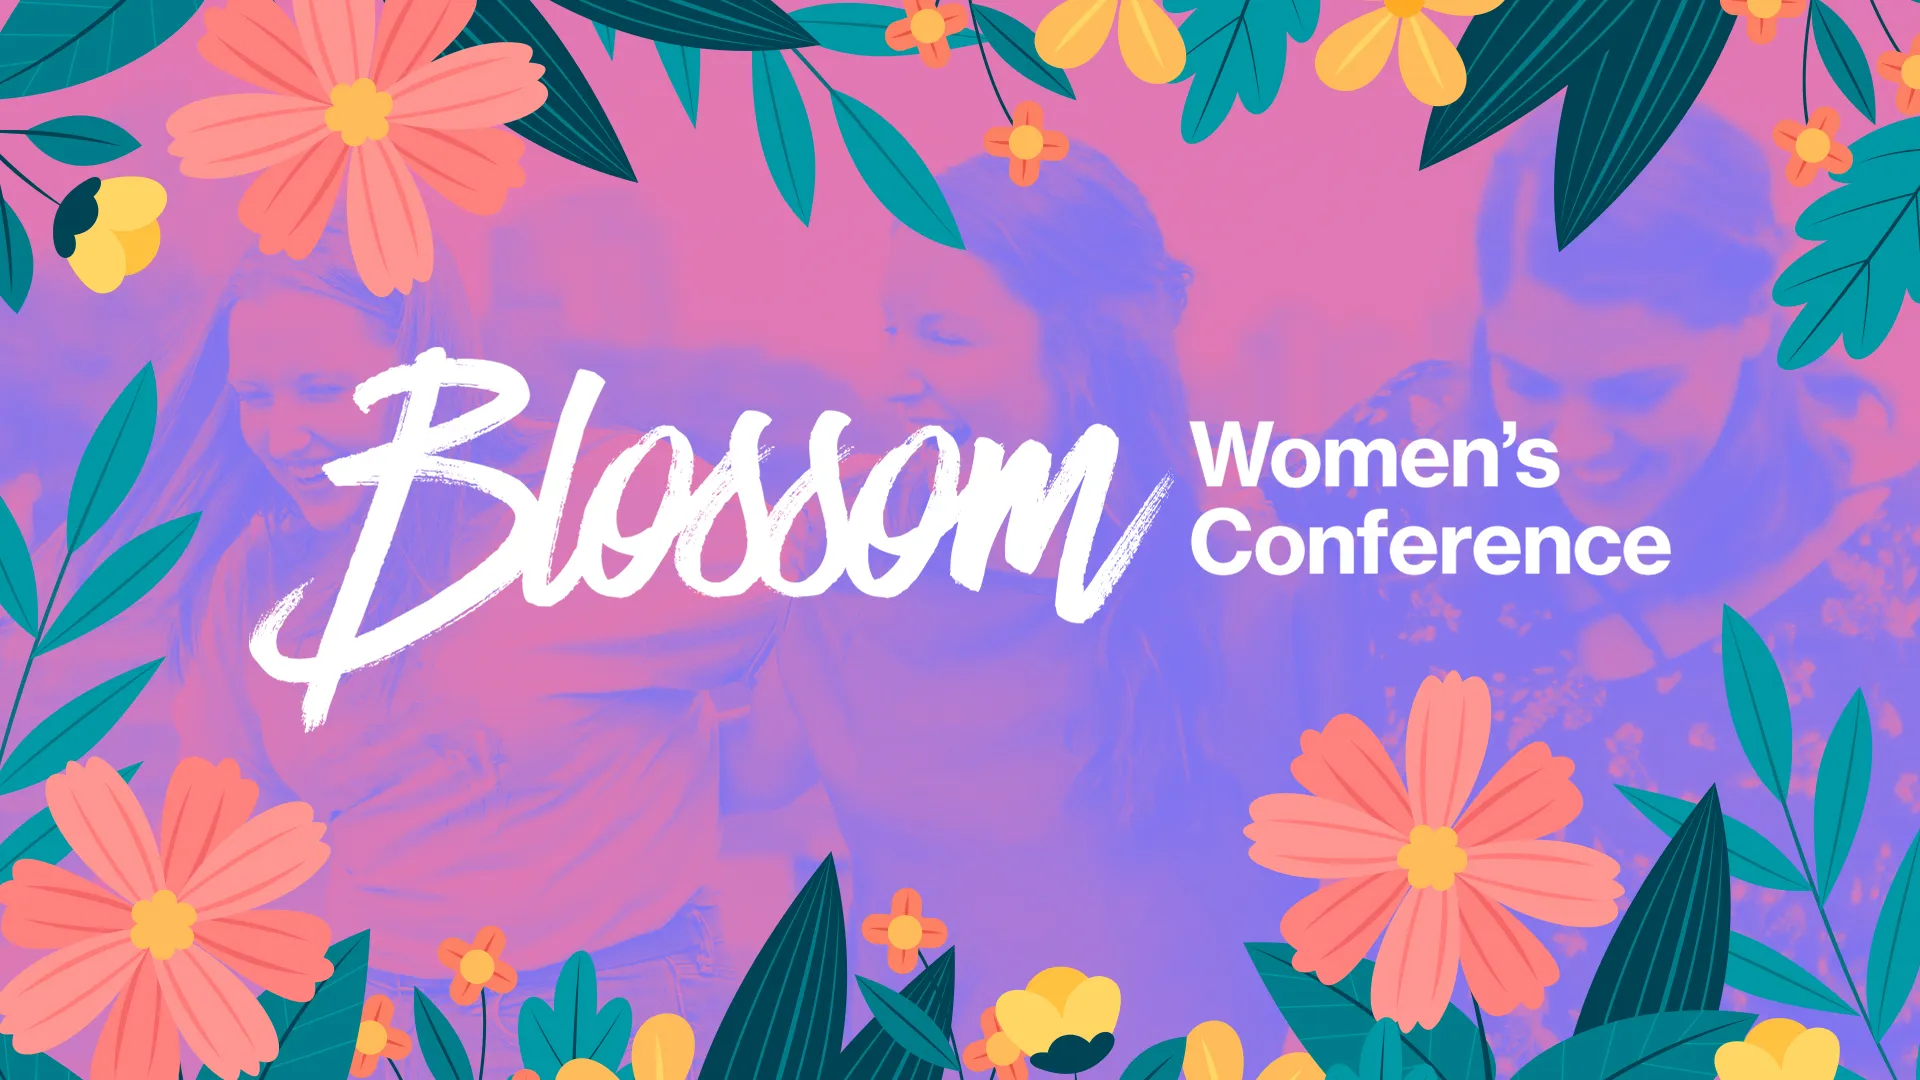 Brighten Up Your Church'S Event Calendar With This Lively And Floral 'Blossom Women’s Conference' Template. Its Playful Mix Of Vibrant Colors And Florals Makes It A Perfect Pick For Spring Events And Women'S Ministry Gatherings, Celebrating Growth And Fellowship In A Spirited Atmosphere.